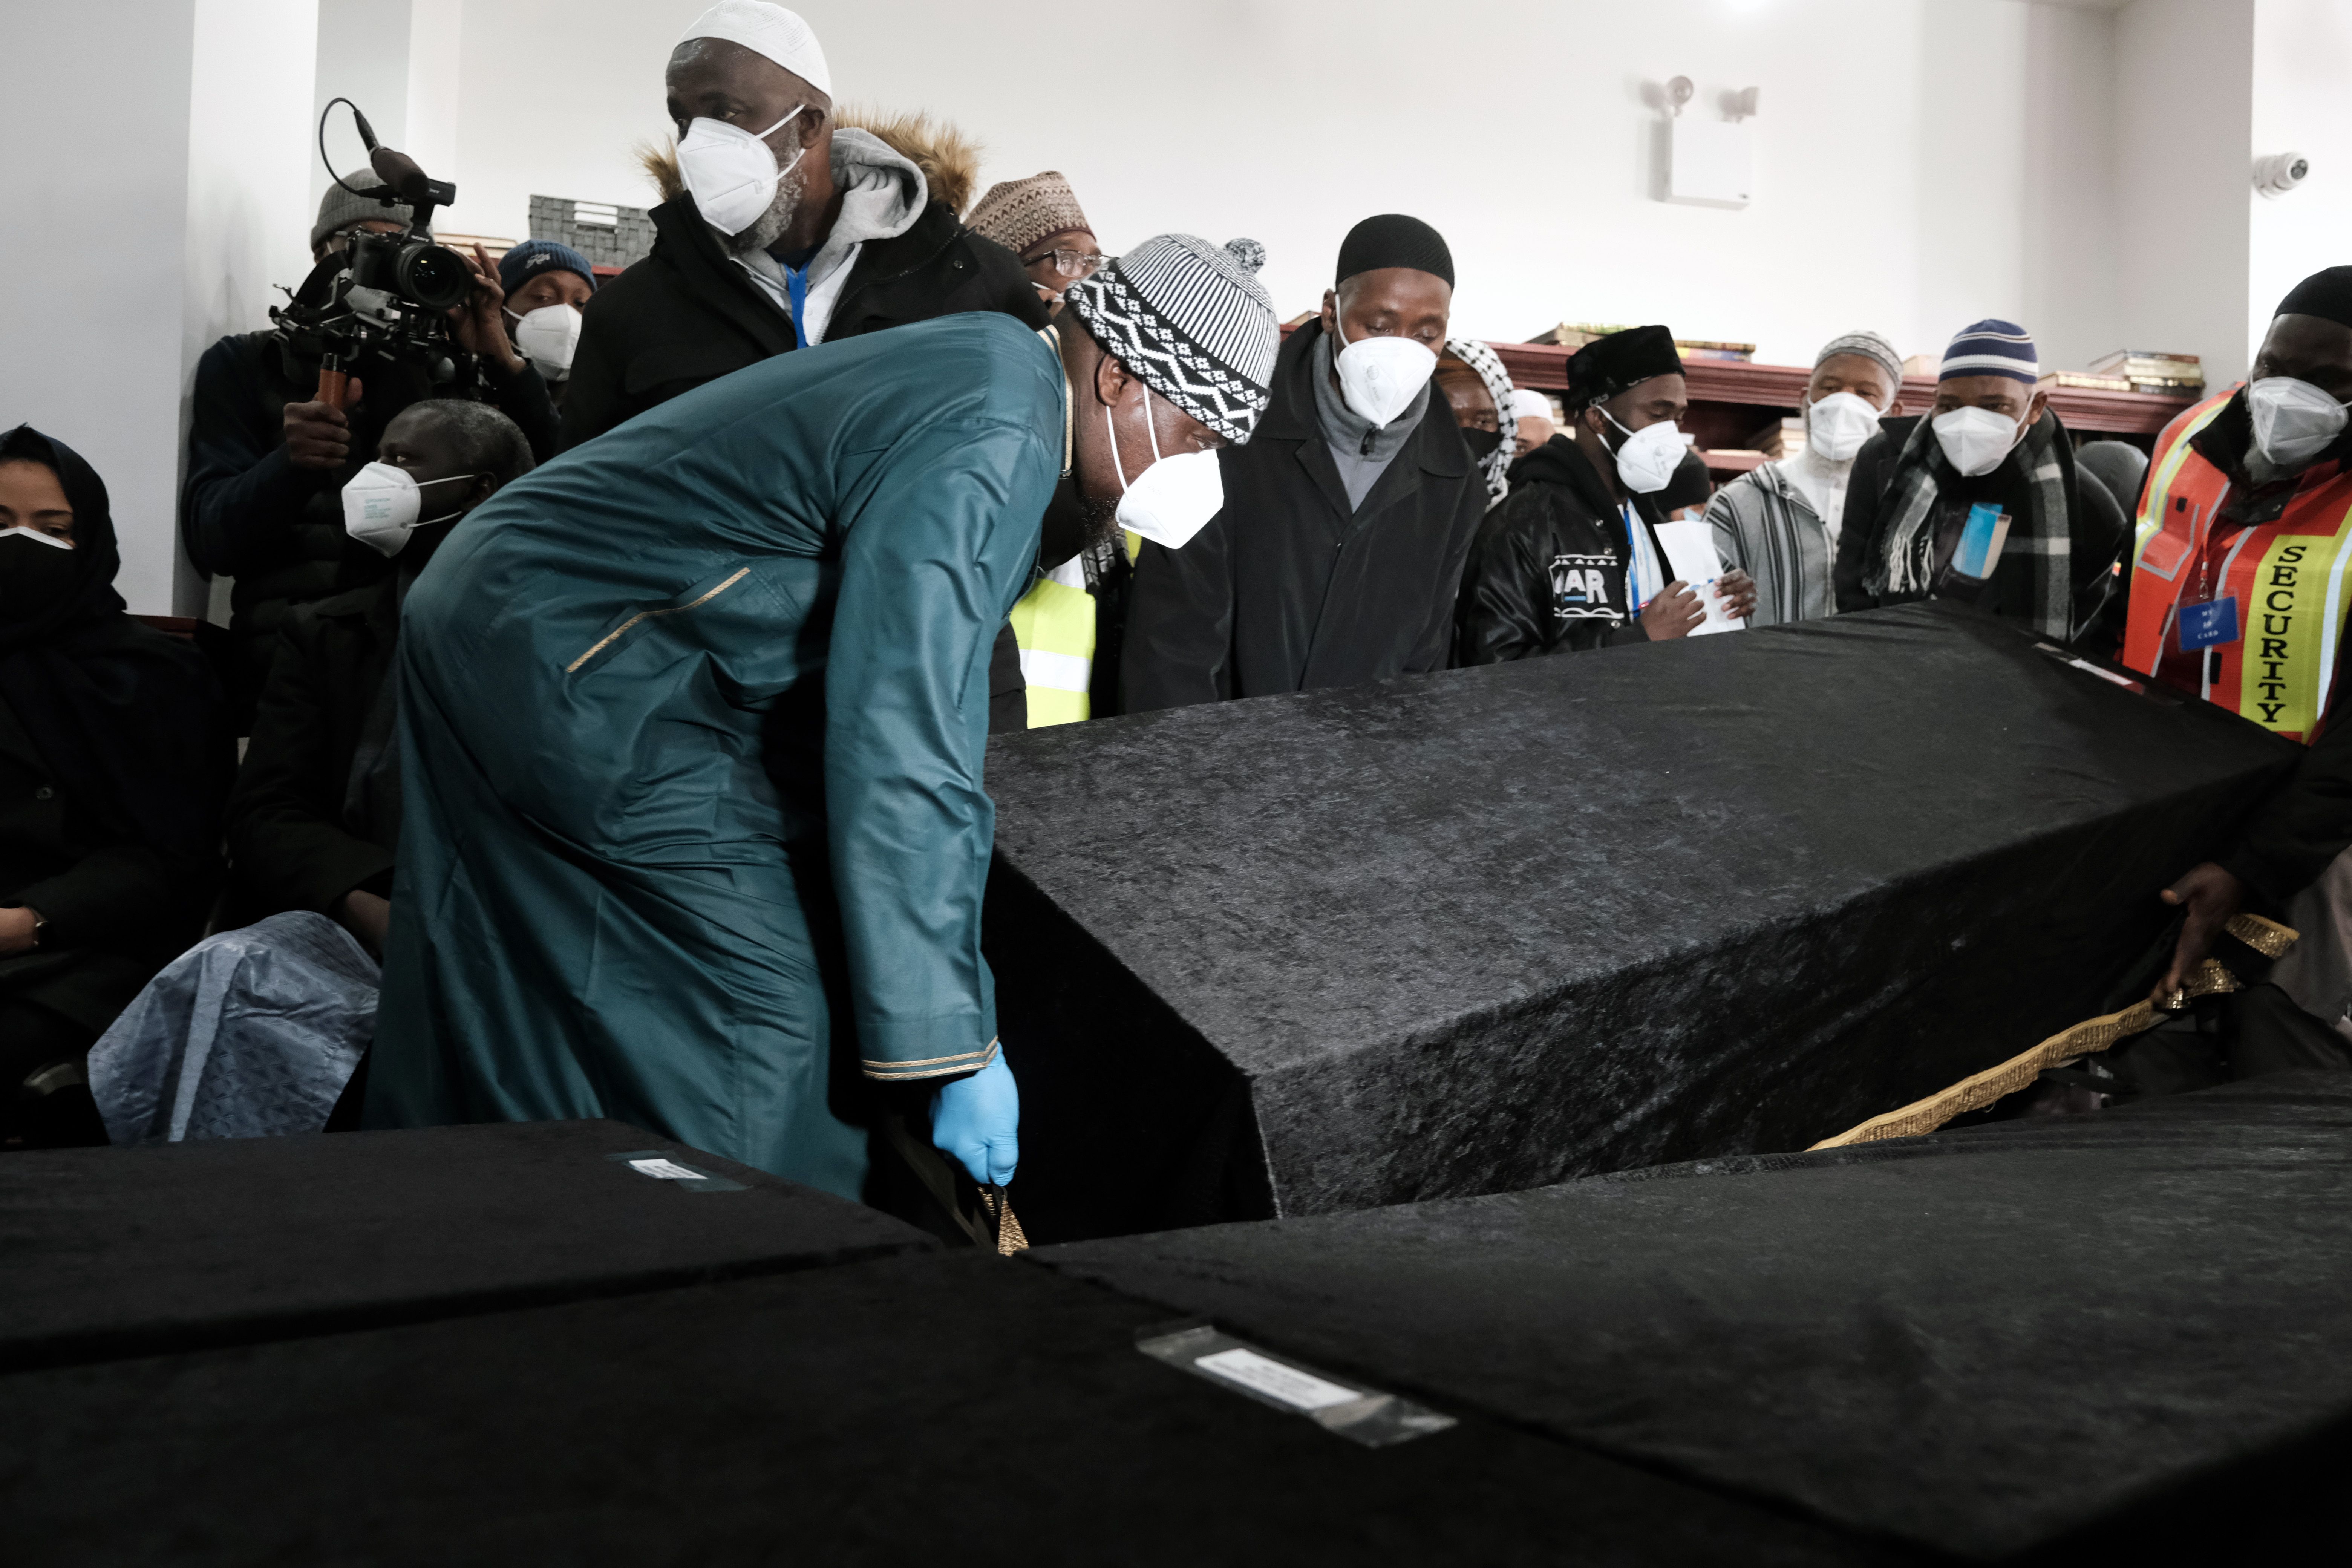 Caskets are brought into the Islamic Cultural Center for a mass funeral for 15